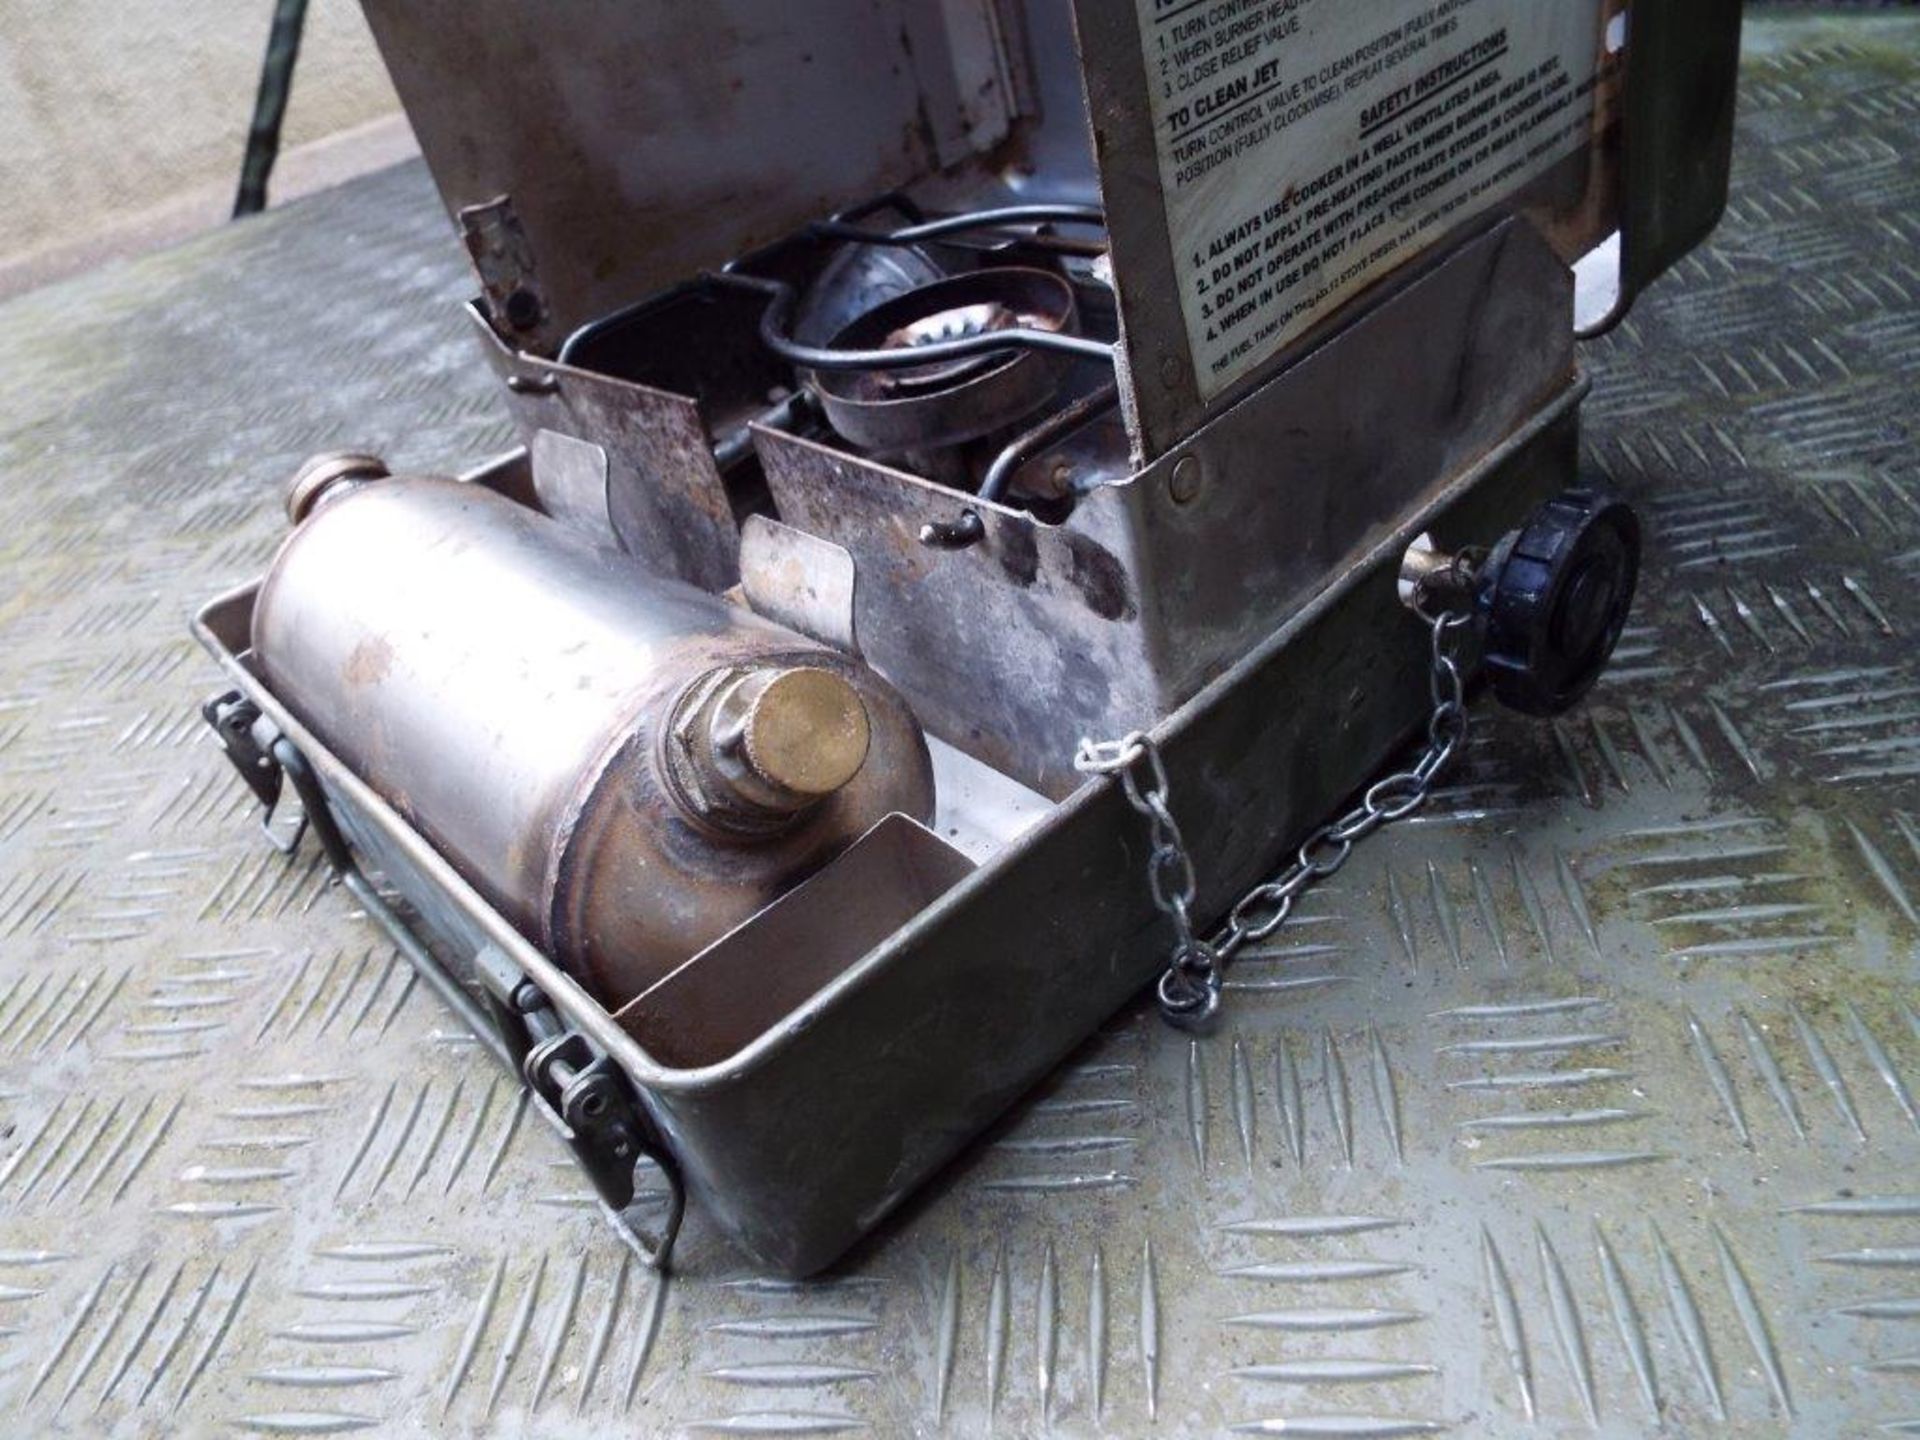 No. 12 Stove, Diesel Cooker/Camping Stove - Image 3 of 7